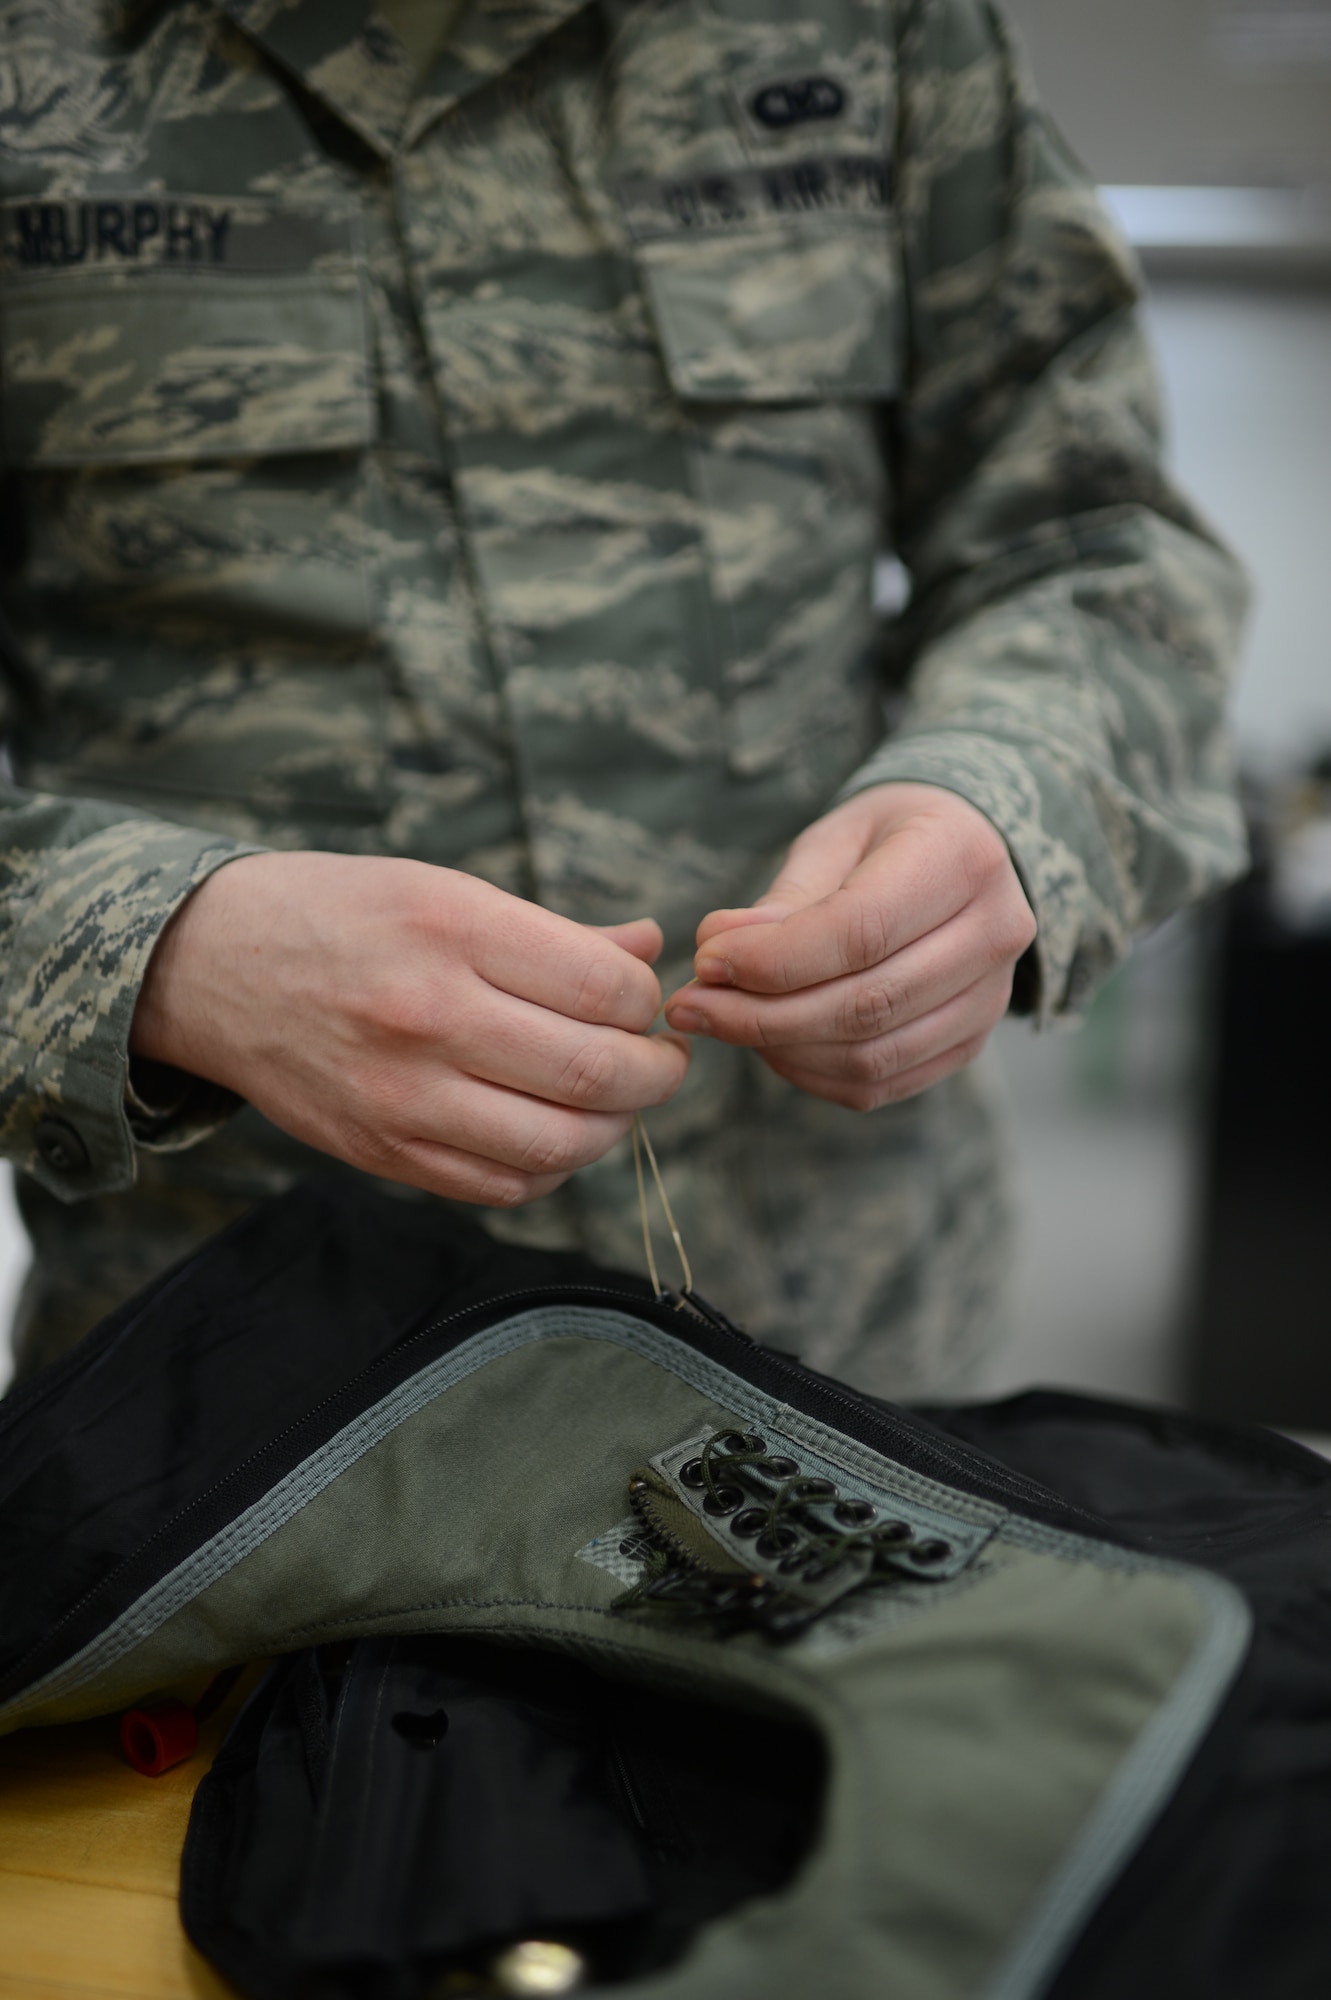 U.S. Air Force Airman 1st Class Remington Murphy, 52nd Operations Support Squadron aircrew flight equipment technician from Richland, Wash., ties a zipper of a life preserver unit at Spangdahlem Air Base, Germany, Feb. 24, 2014. The life preserver, which rests around a pilot’s neck, deploys on contact with water to ensure the user stays afloat after a crash. (U.S. Air Force photo by Senior Airman Gustavo Castillo/Released)